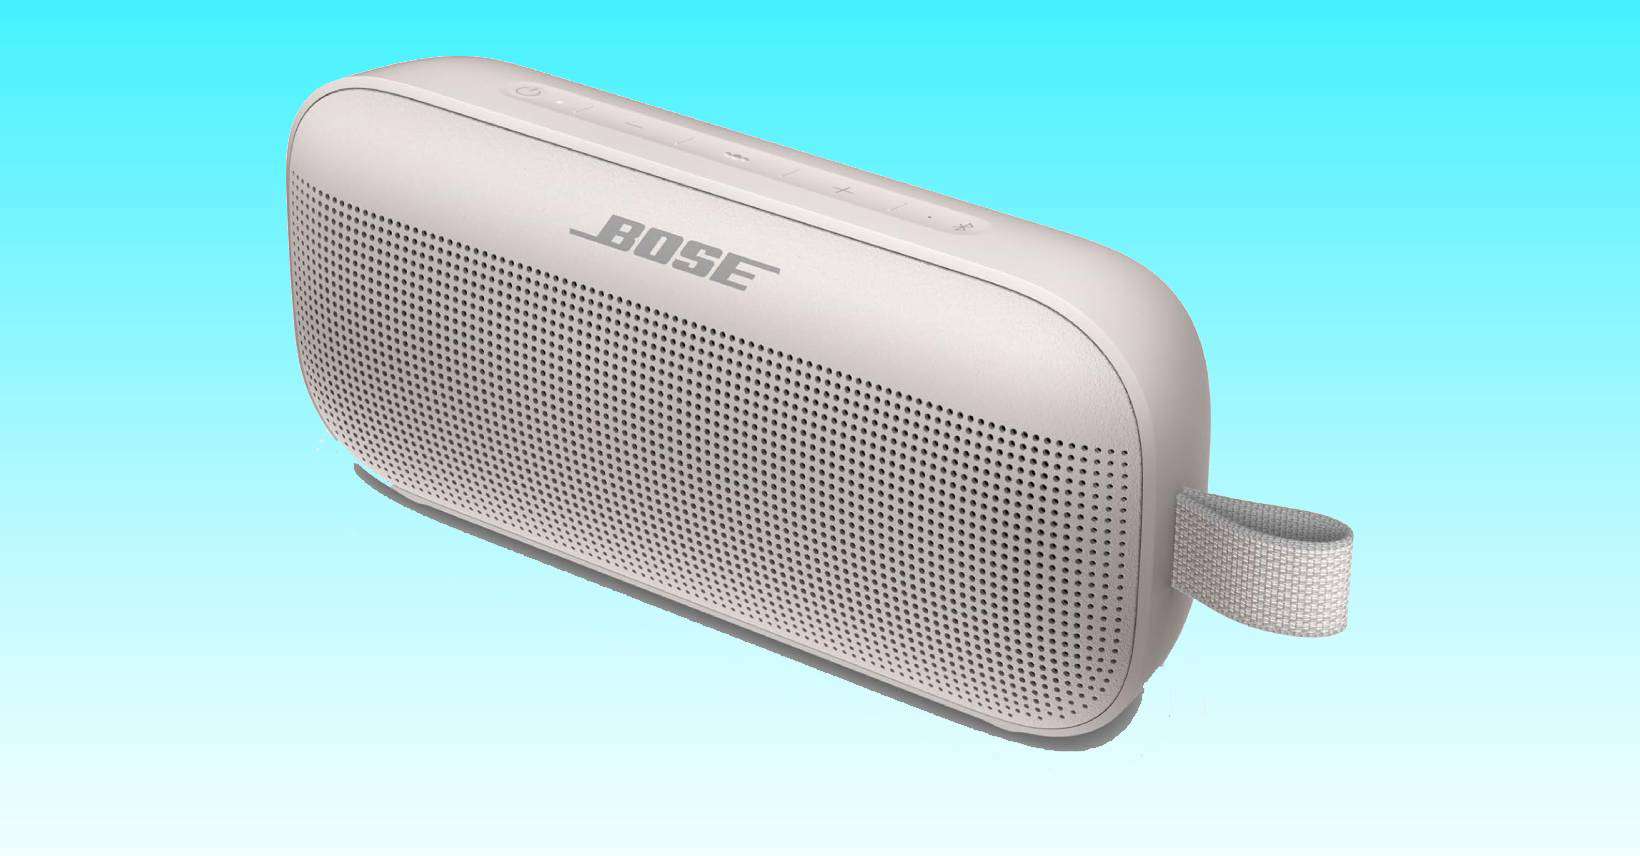  Bose SoundLink Flex Bluetooth Speaker, Portable Speaker with  Microphone, Wireless Waterproof Speaker for Travel, Outdoor and Pool Use,  White : Electronics